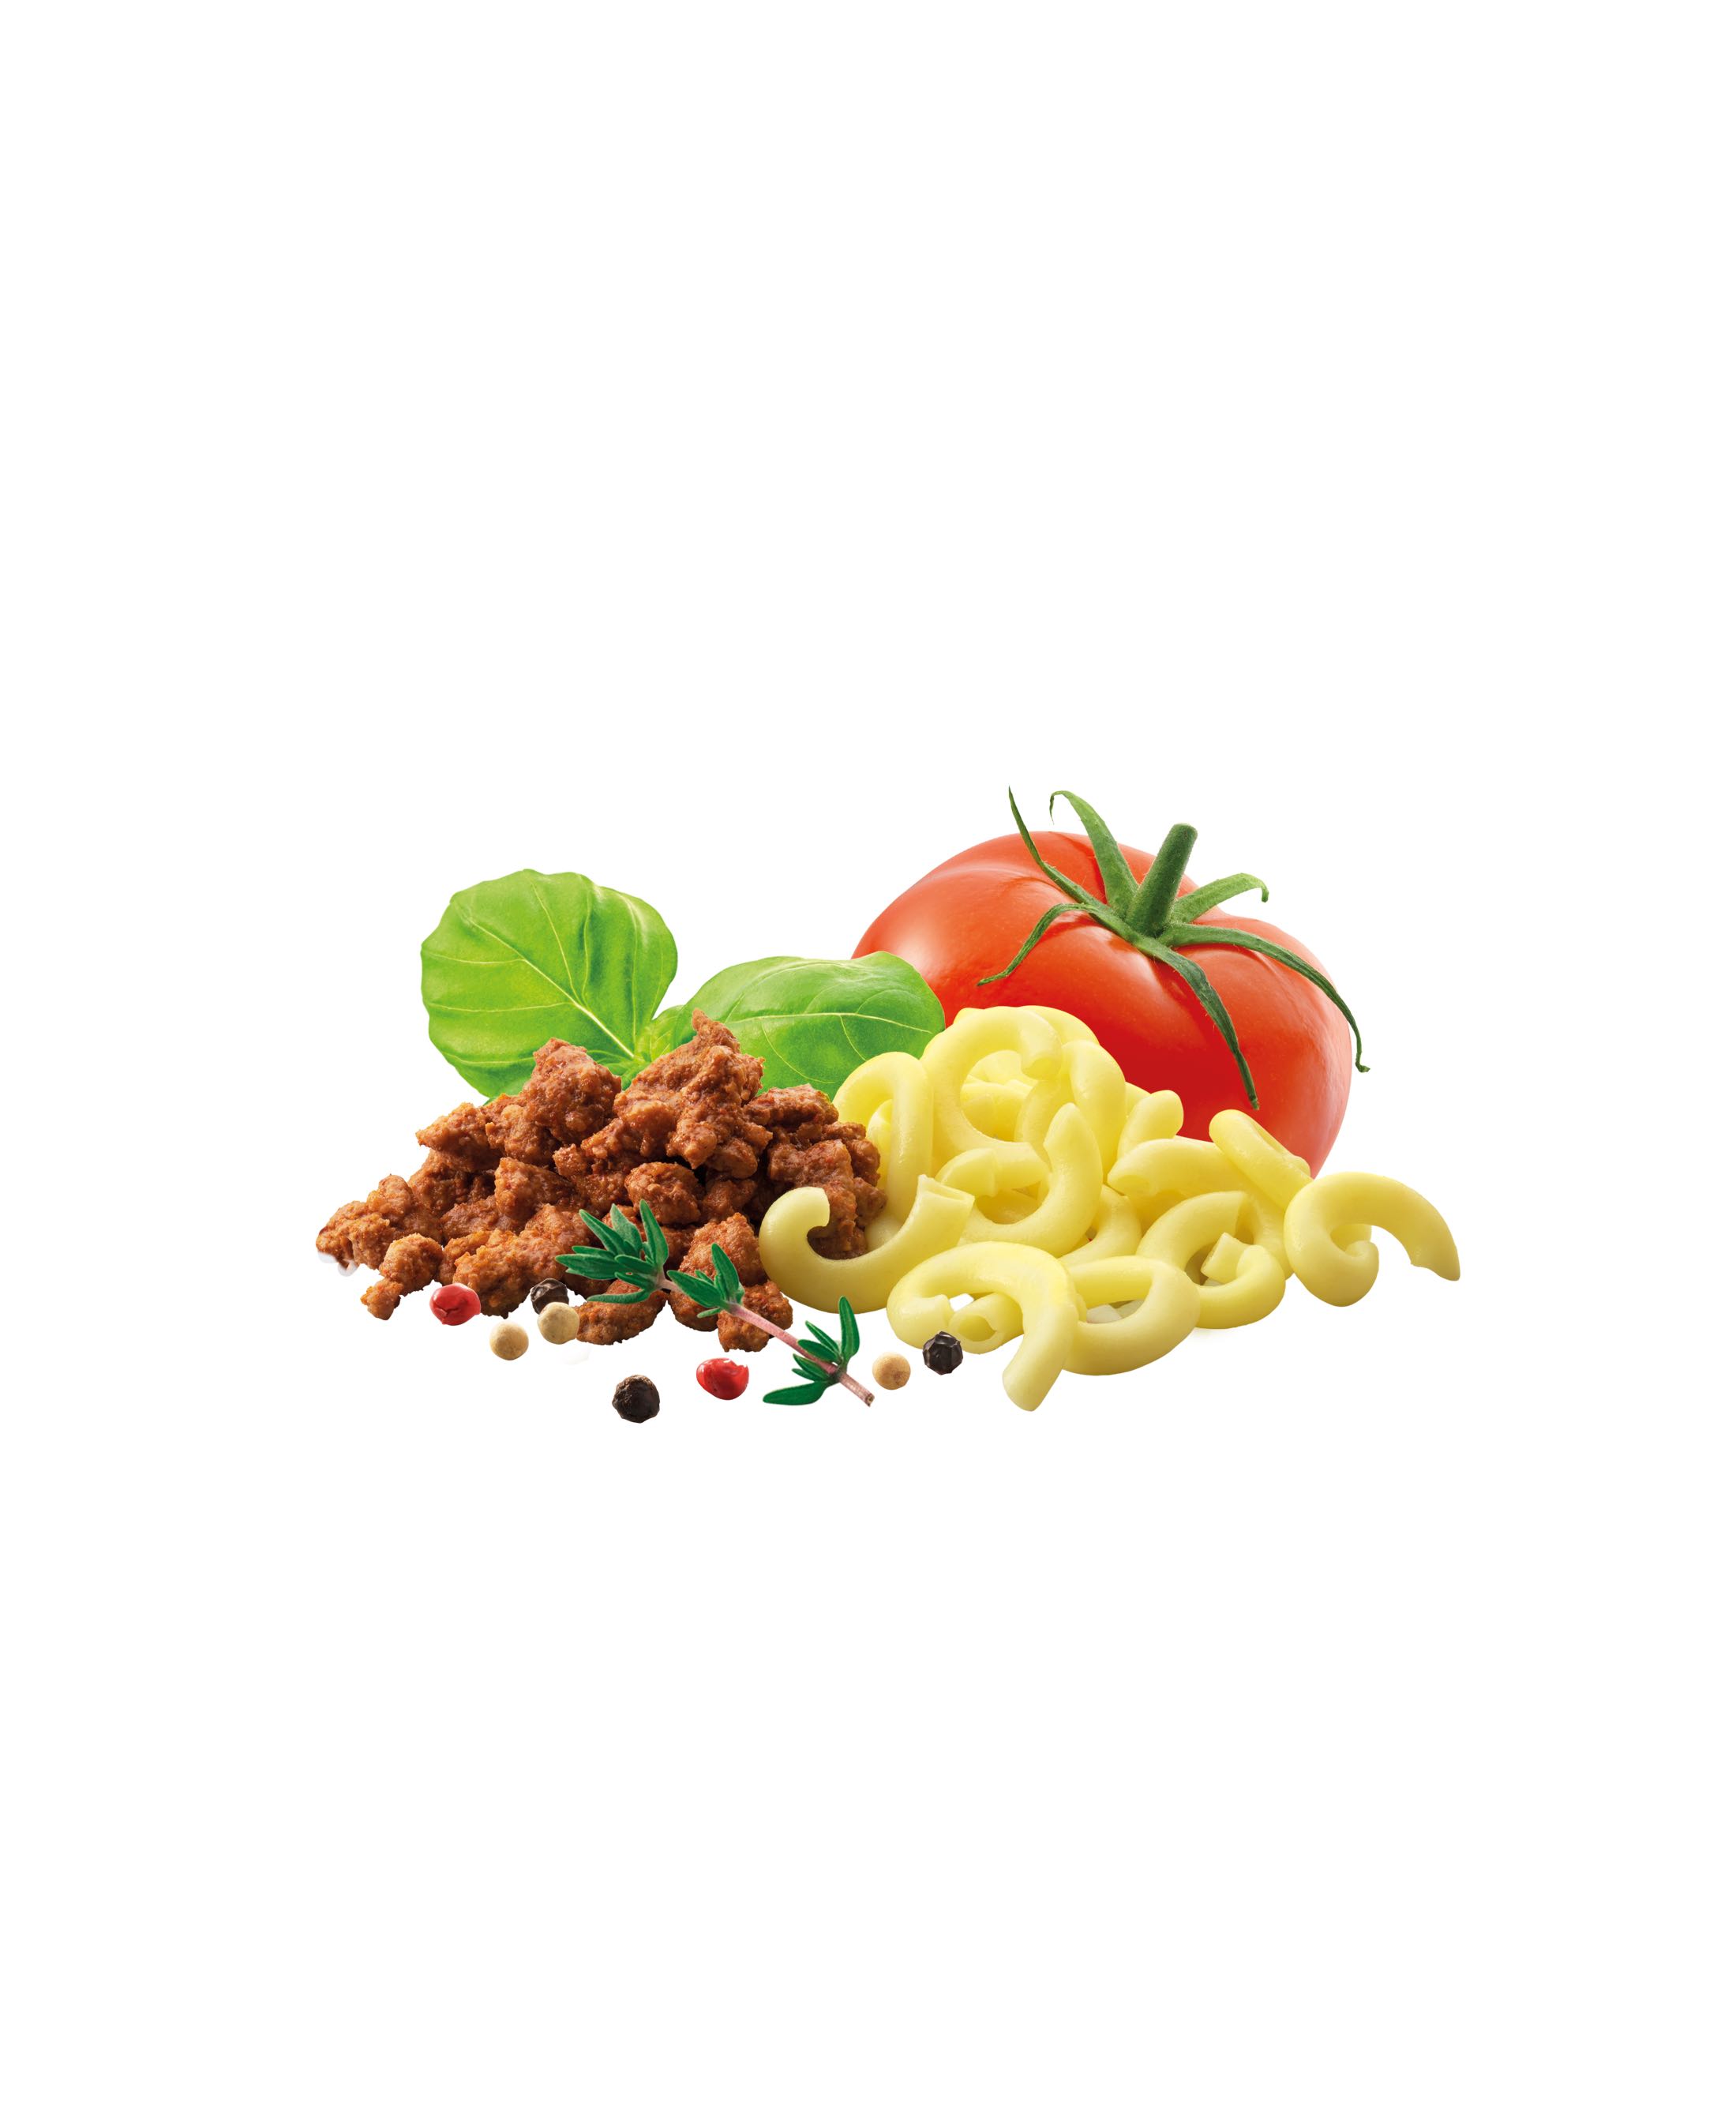 Adventure Food Pasta Bolognese (18-pack)